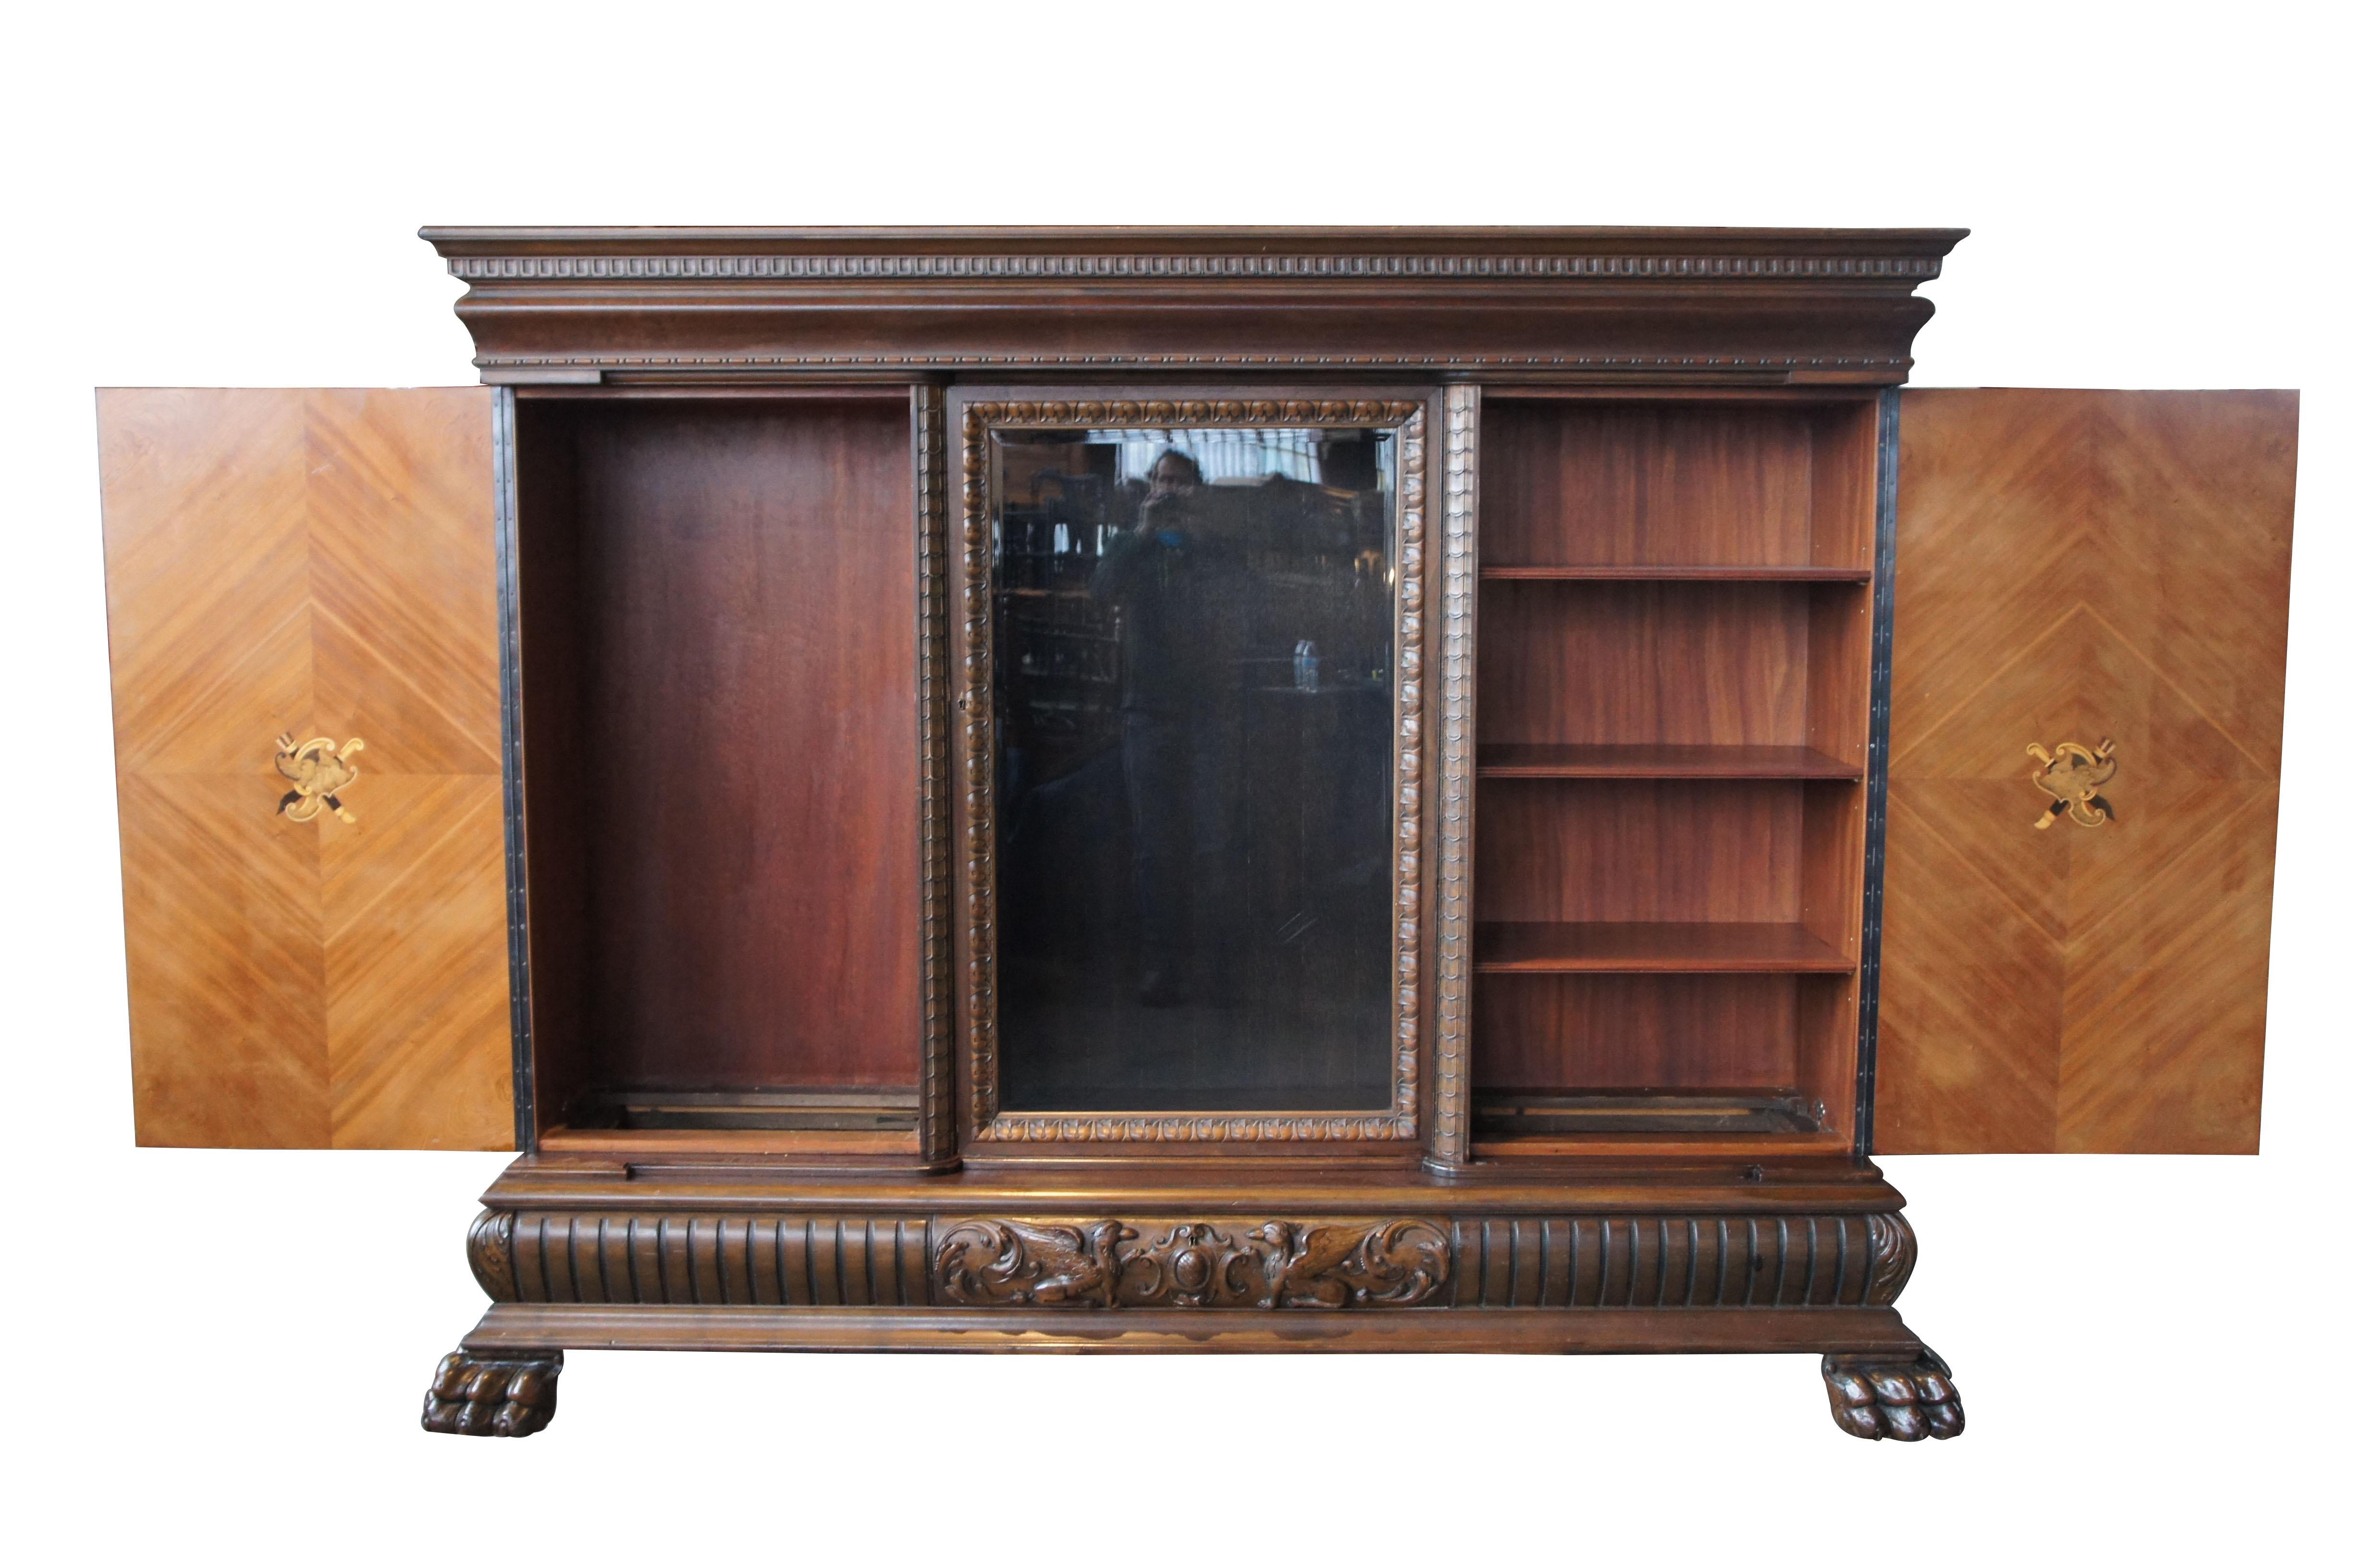 Massive antique Renaissance Revival walnut carved knockdown bookcase armoire

Made from walnut with extensive carvings and matchbook veneered outer panels. There are three-door compartments and one lower dovetailed drawer. All four areas are